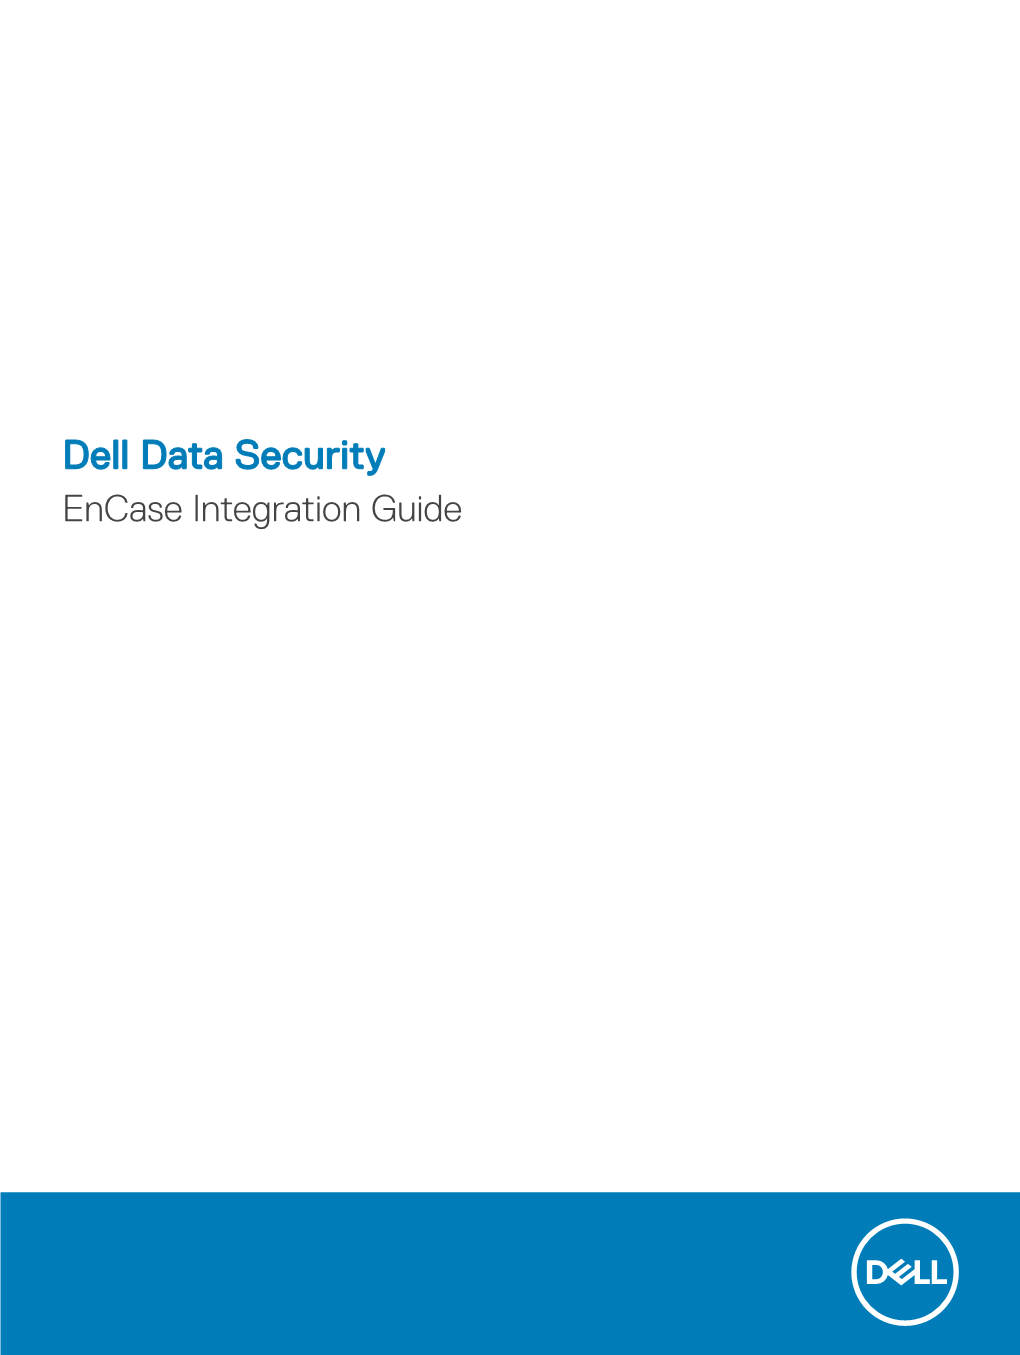 Dell Data Security Encase Integration Guide Notes, Cautions, and Warnings